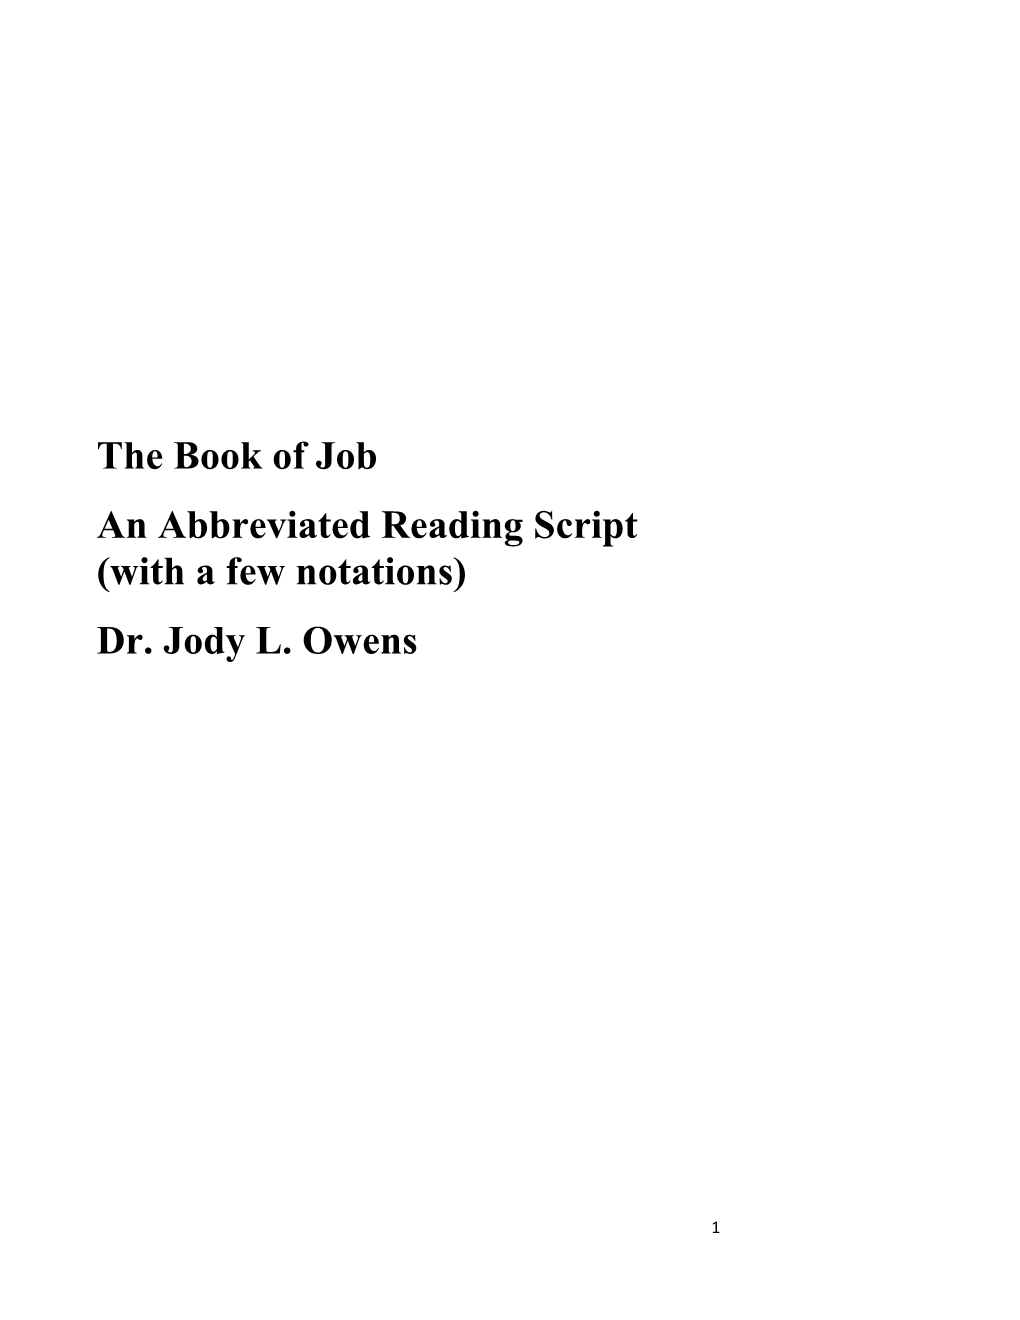 The Book of Job an Abbreviated Reading Script (With a Few Notations) Dr